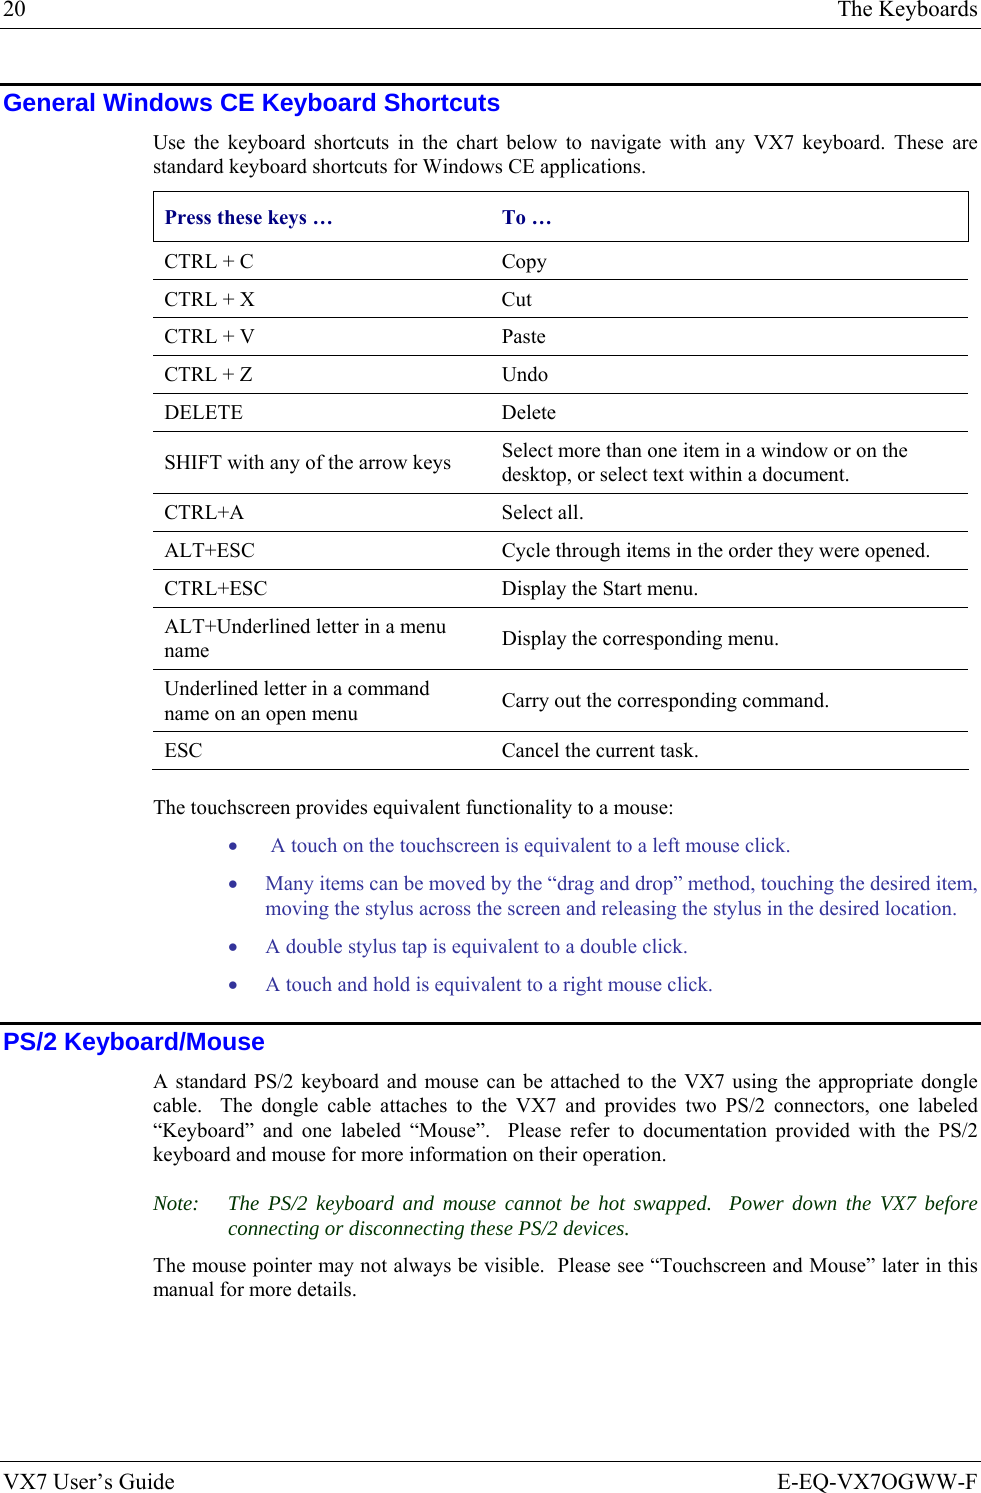 20  The Keyboards VX7 User’s Guide  E-EQ-VX7OGWW-F General Windows CE Keyboard Shortcuts Use the keyboard shortcuts in the chart below to navigate with any VX7 keyboard. These are standard keyboard shortcuts for Windows CE applications. Press these keys …   To … CTRL + C   Copy CTRL + X   Cut CTRL + V   Paste CTRL + Z   Undo DELETE   Delete SHIFT with any of the arrow keys   Select more than one item in a window or on the desktop, or select text within a document. CTRL+A   Select all. ALT+ESC   Cycle through items in the order they were opened. CTRL+ESC  Display the Start menu. ALT+Underlined letter in a menu name   Display the corresponding menu. Underlined letter in a command name on an open menu  Carry out the corresponding command. ESC   Cancel the current task. The touchscreen provides equivalent functionality to a mouse: •  A touch on the touchscreen is equivalent to a left mouse click. • Many items can be moved by the “drag and drop” method, touching the desired item, moving the stylus across the screen and releasing the stylus in the desired location. • A double stylus tap is equivalent to a double click. • A touch and hold is equivalent to a right mouse click. PS/2 Keyboard/Mouse A standard PS/2 keyboard and mouse can be attached to the VX7 using the appropriate dongle cable.  The dongle cable attaches to the VX7 and provides two PS/2 connectors, one labeled “Keyboard” and one labeled “Mouse”.  Please refer to documentation provided with the PS/2 keyboard and mouse for more information on their operation. Note:  The PS/2 keyboard and mouse cannot be hot swapped.  Power down the VX7 before connecting or disconnecting these PS/2 devices. The mouse pointer may not always be visible.  Please see “Touchscreen and Mouse” later in this manual for more details. 